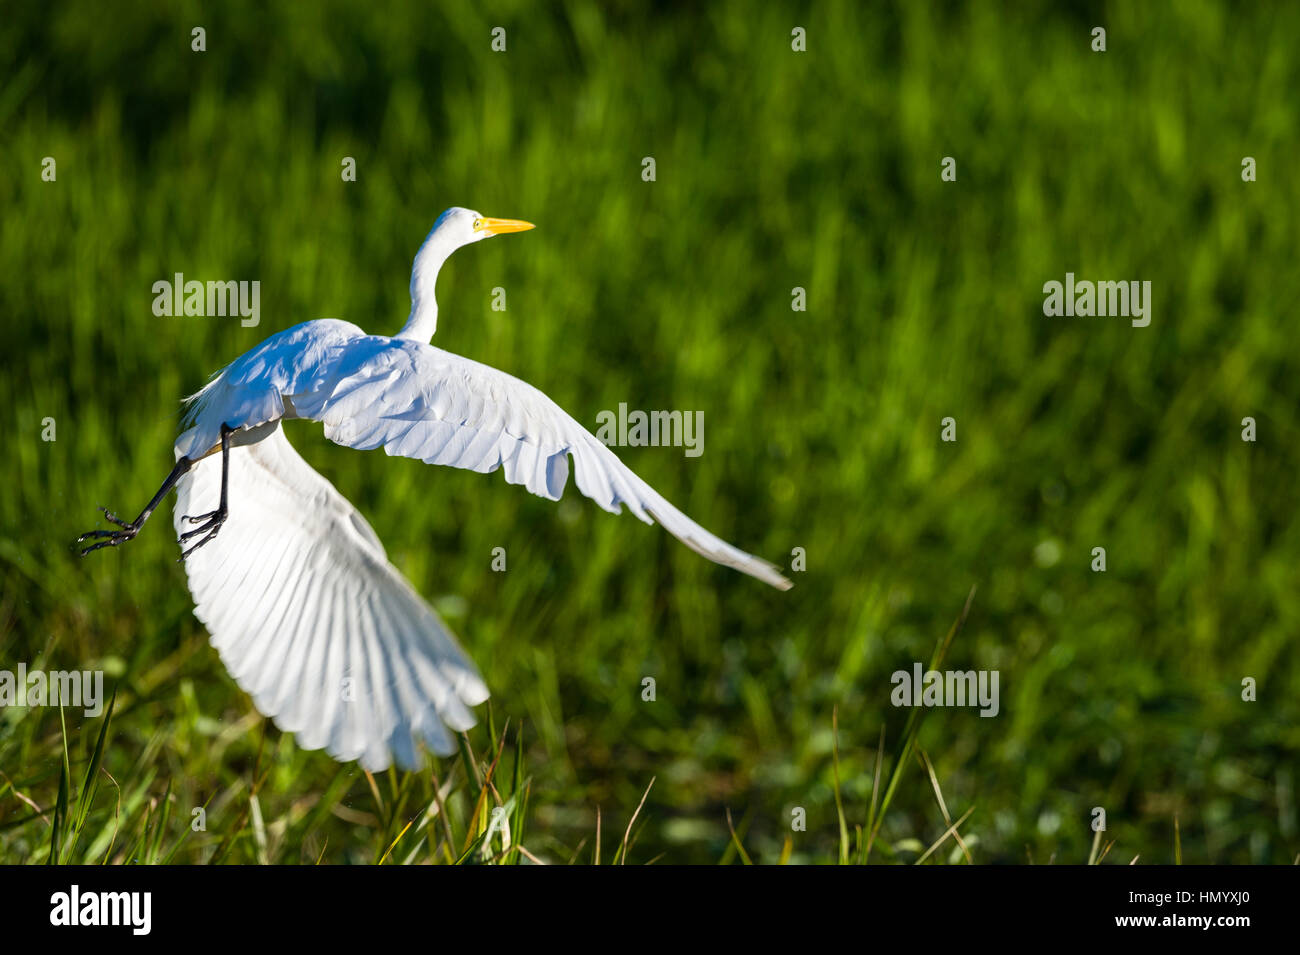 An Intermediate Egret flaps it's large wings to launch from a wetland. Stock Photo